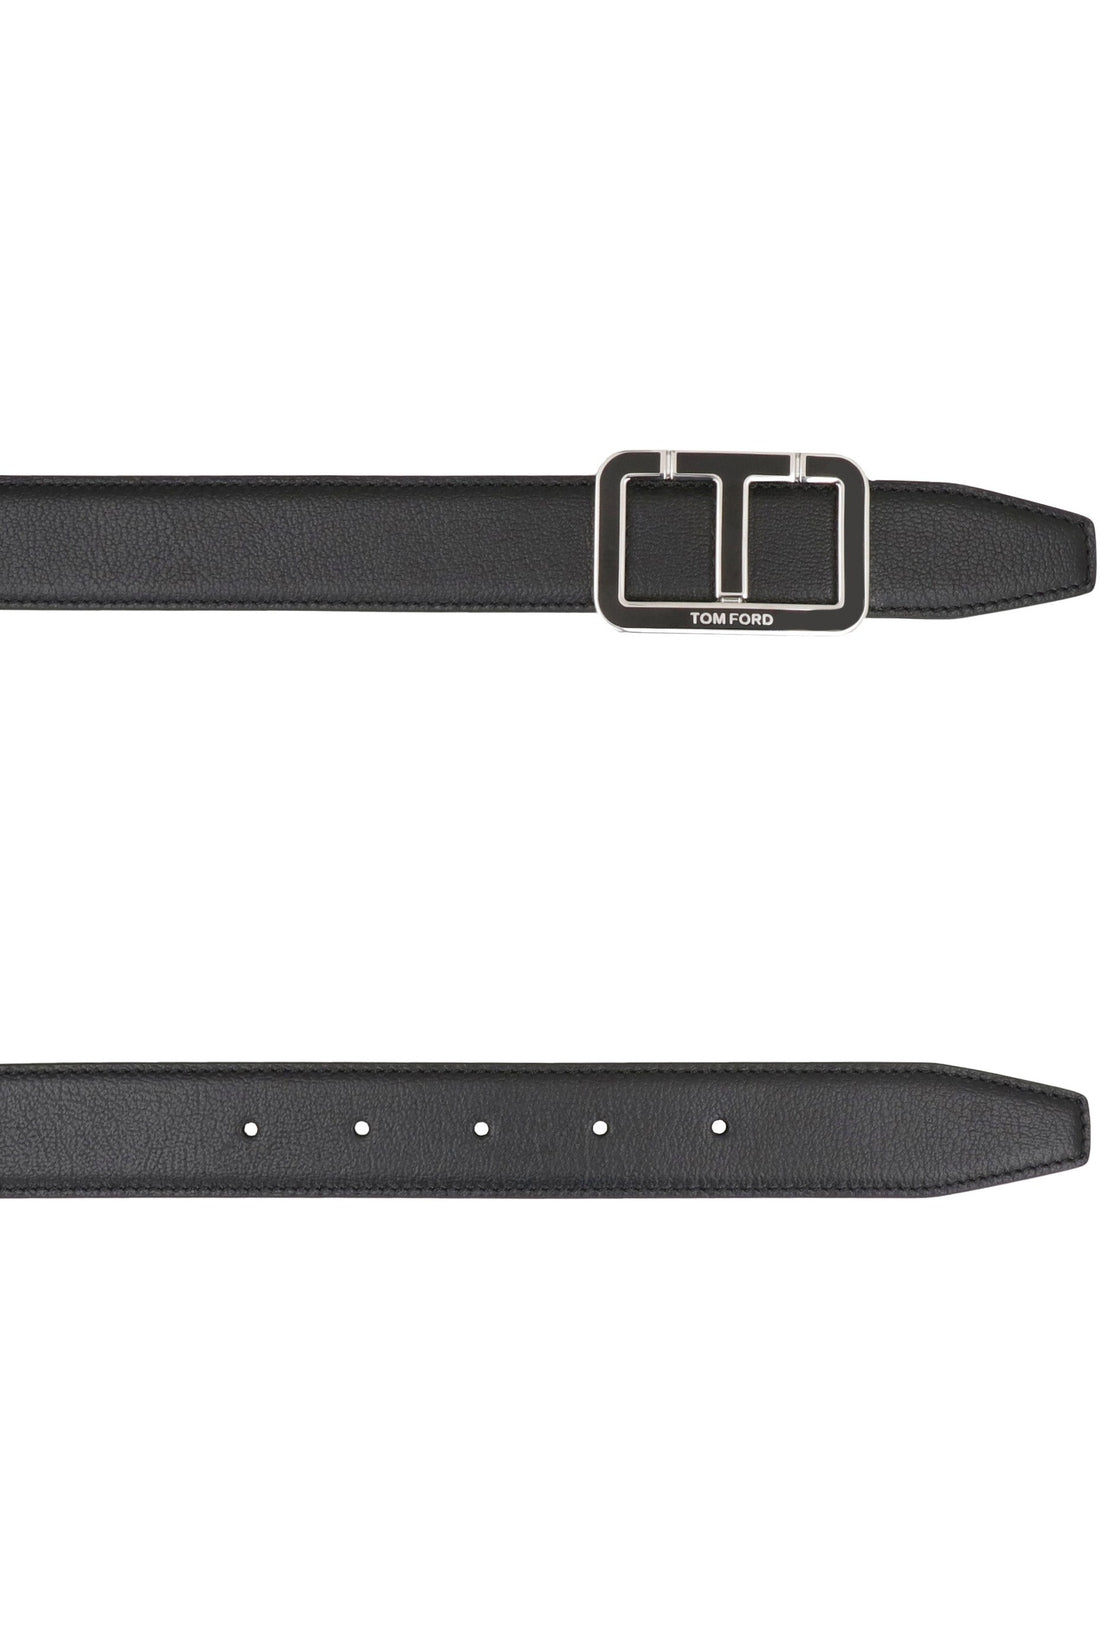 Tom Ford-OUTLET-SALE-Calf leather belt with buckle-ARCHIVIST